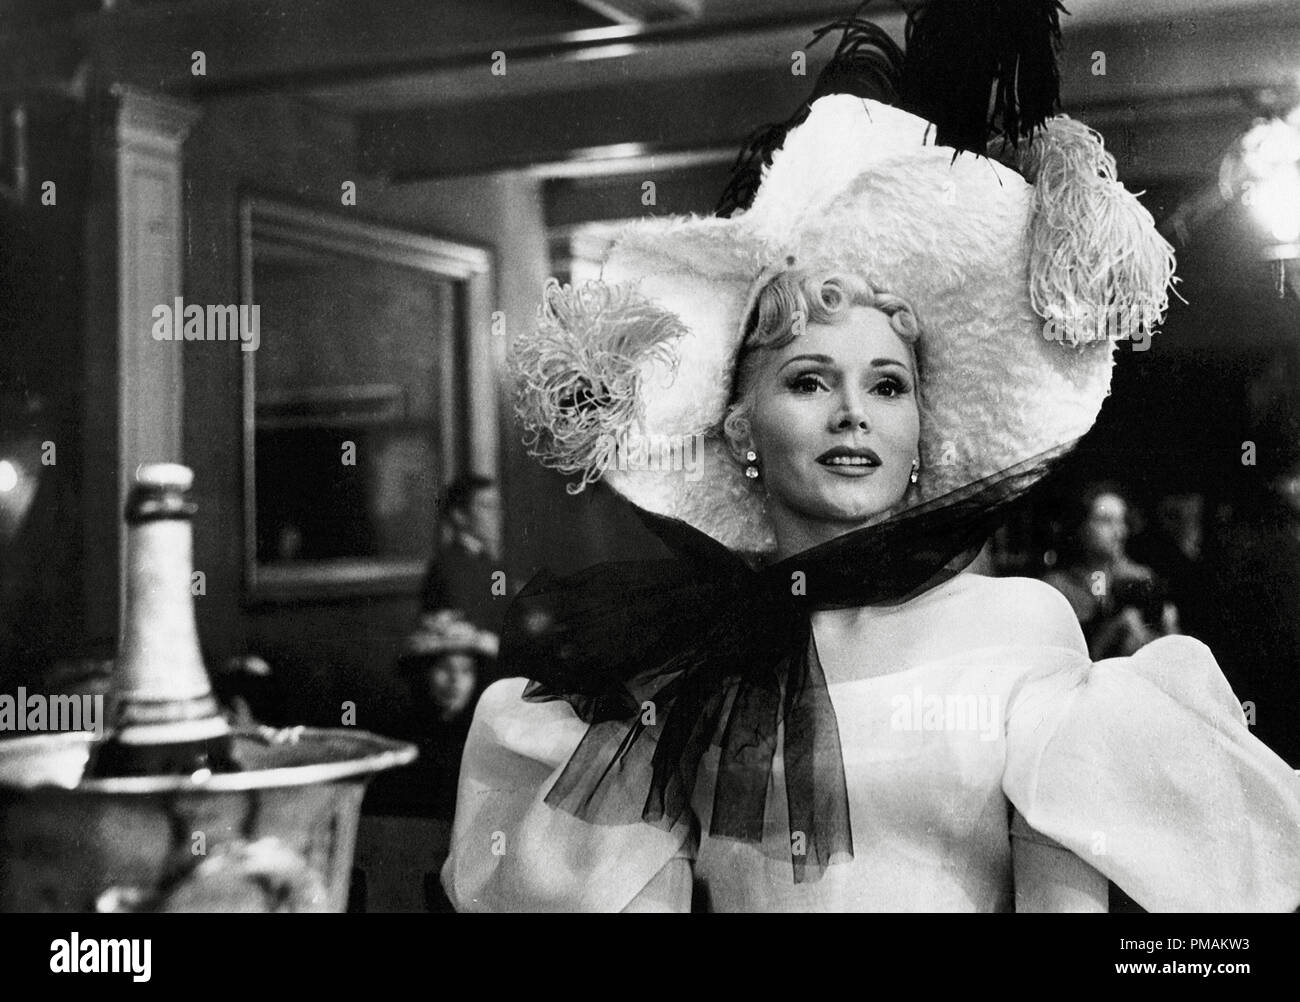 Zsa Zsa Gabor, 'Moulin Rouge' (1952) United Artists Datei Referenz # 33300 720 THA Stockfoto